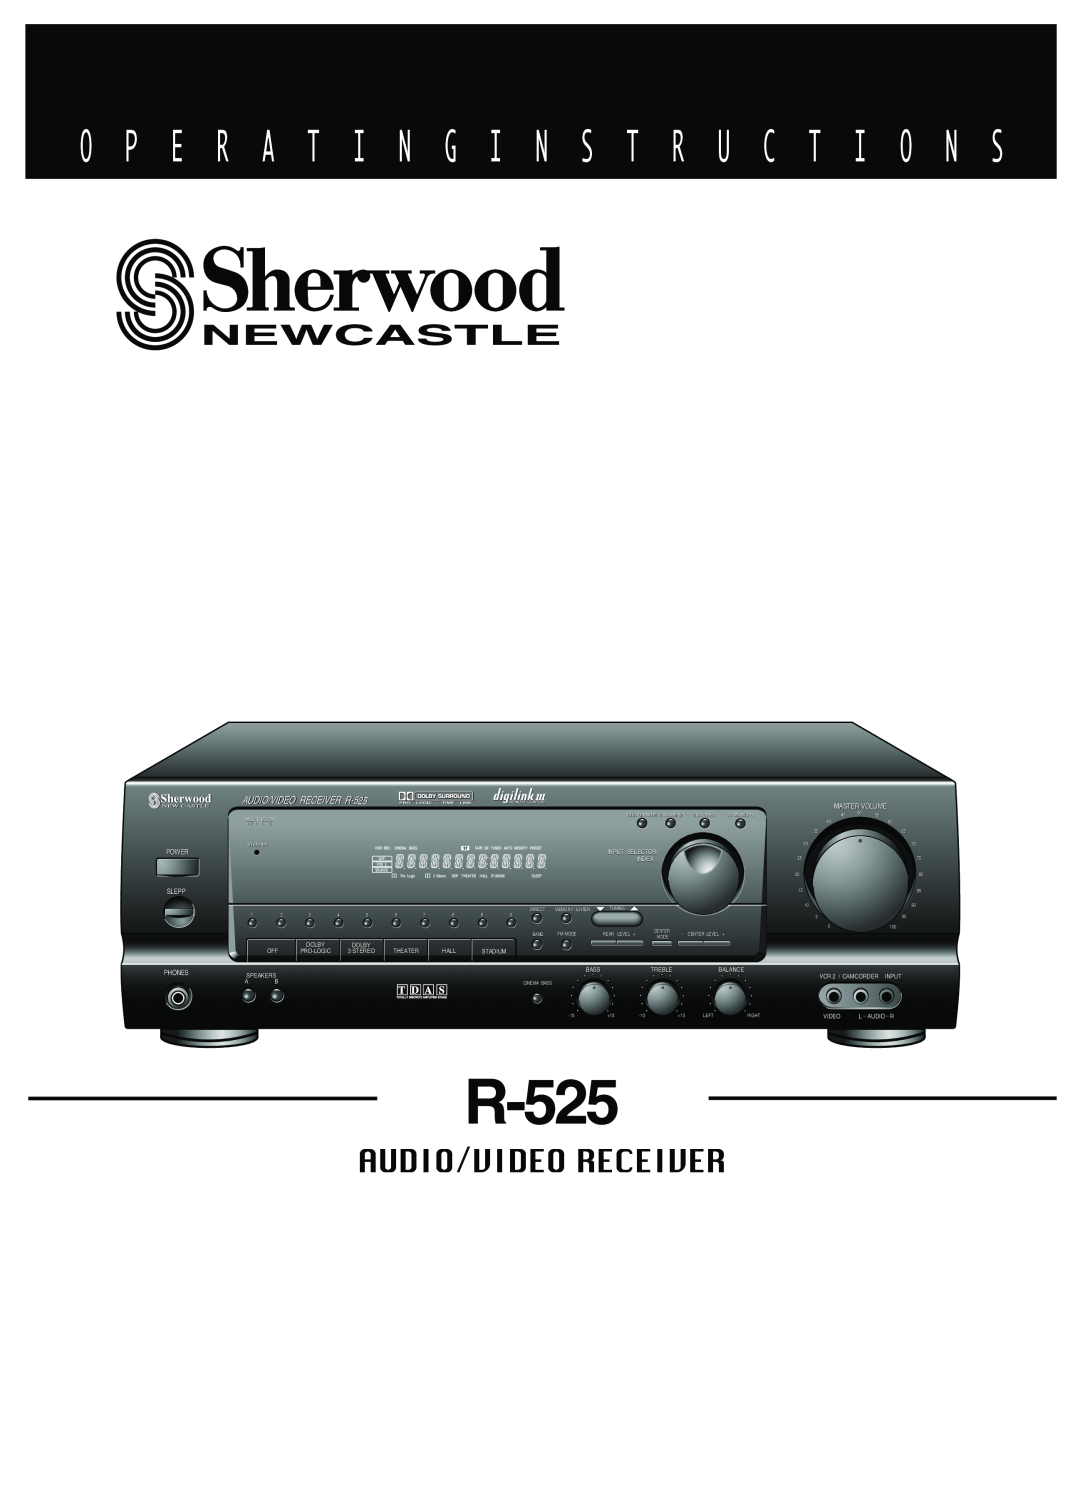 Sherwood R-525 operating instructions O P E R A T I N G I N S T R U C T I O N S, Audio/Video Receiver, Power, Sleppep 